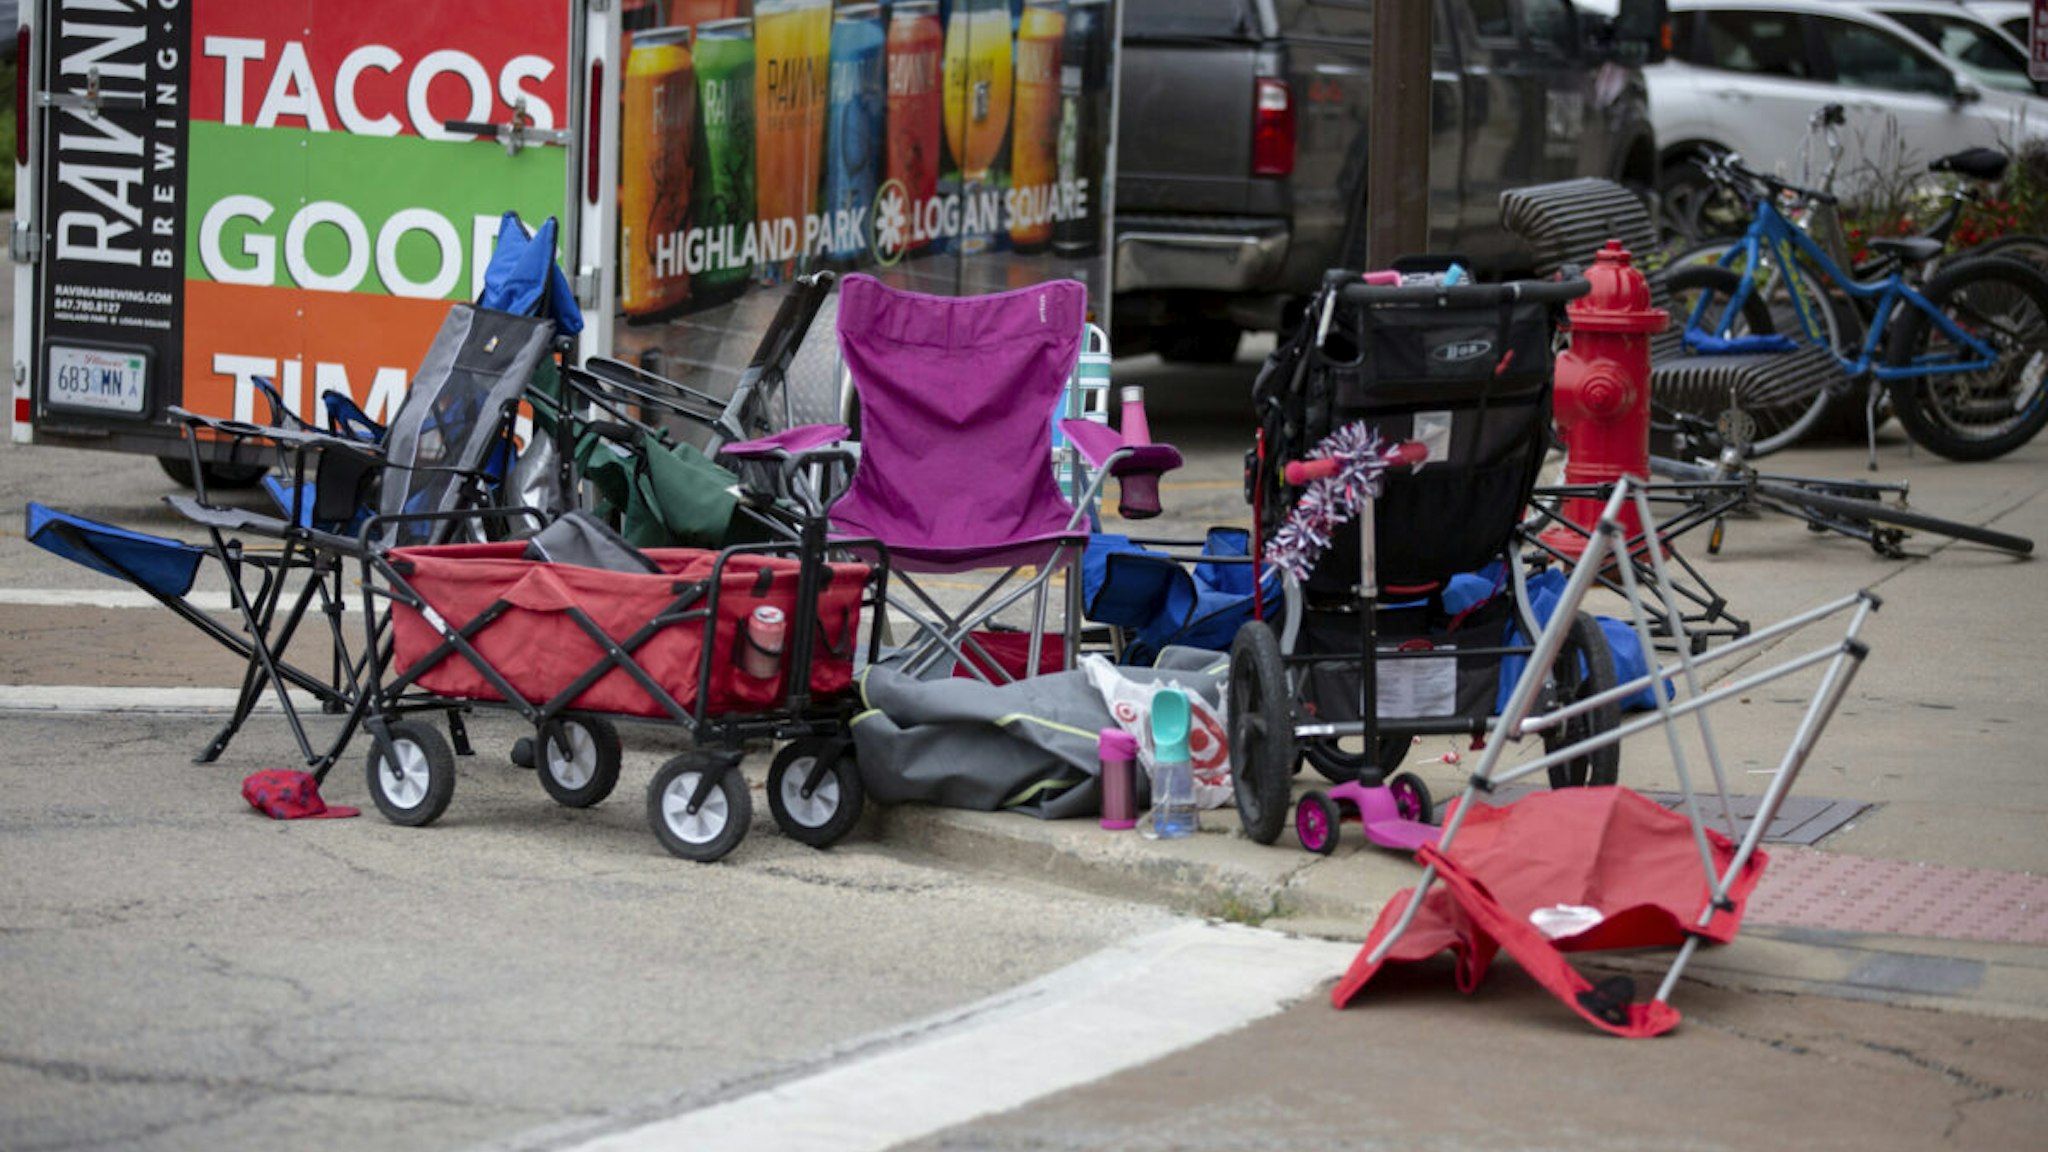 Seats used by parade watchers are left abandoned at the scene after a mass shooting at a Fourth of July parade on July 4, 2022 in Highland Park, Illinois. Reports indicate at least six people were killed and more than 20 injured in the shooting